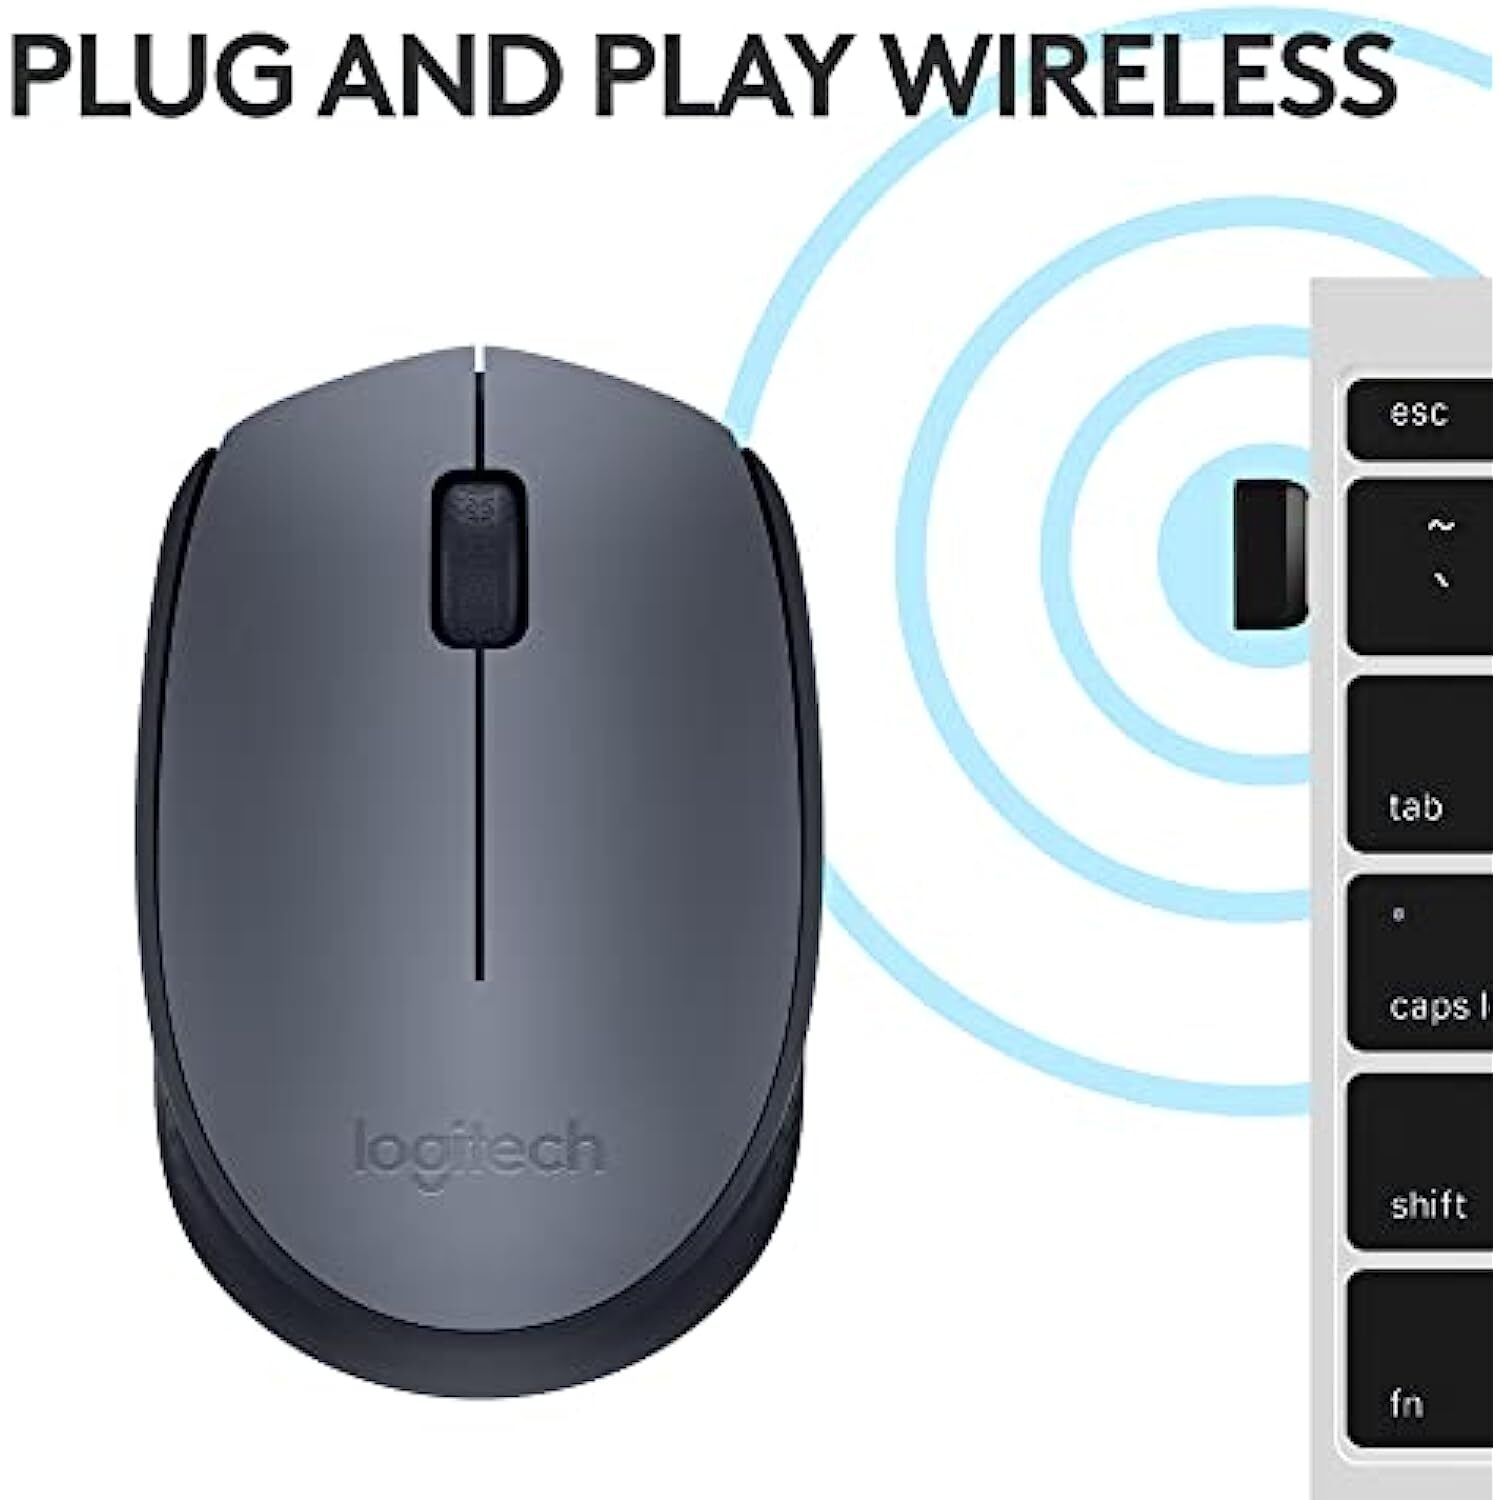 Logitech M170 Wireless Mouse, 2.4 GHz with USB Mini Receiver, Optical Tracking, 12-Months Battery Life, Ambidextrous PC/Mac/Laptop - Grey/Black